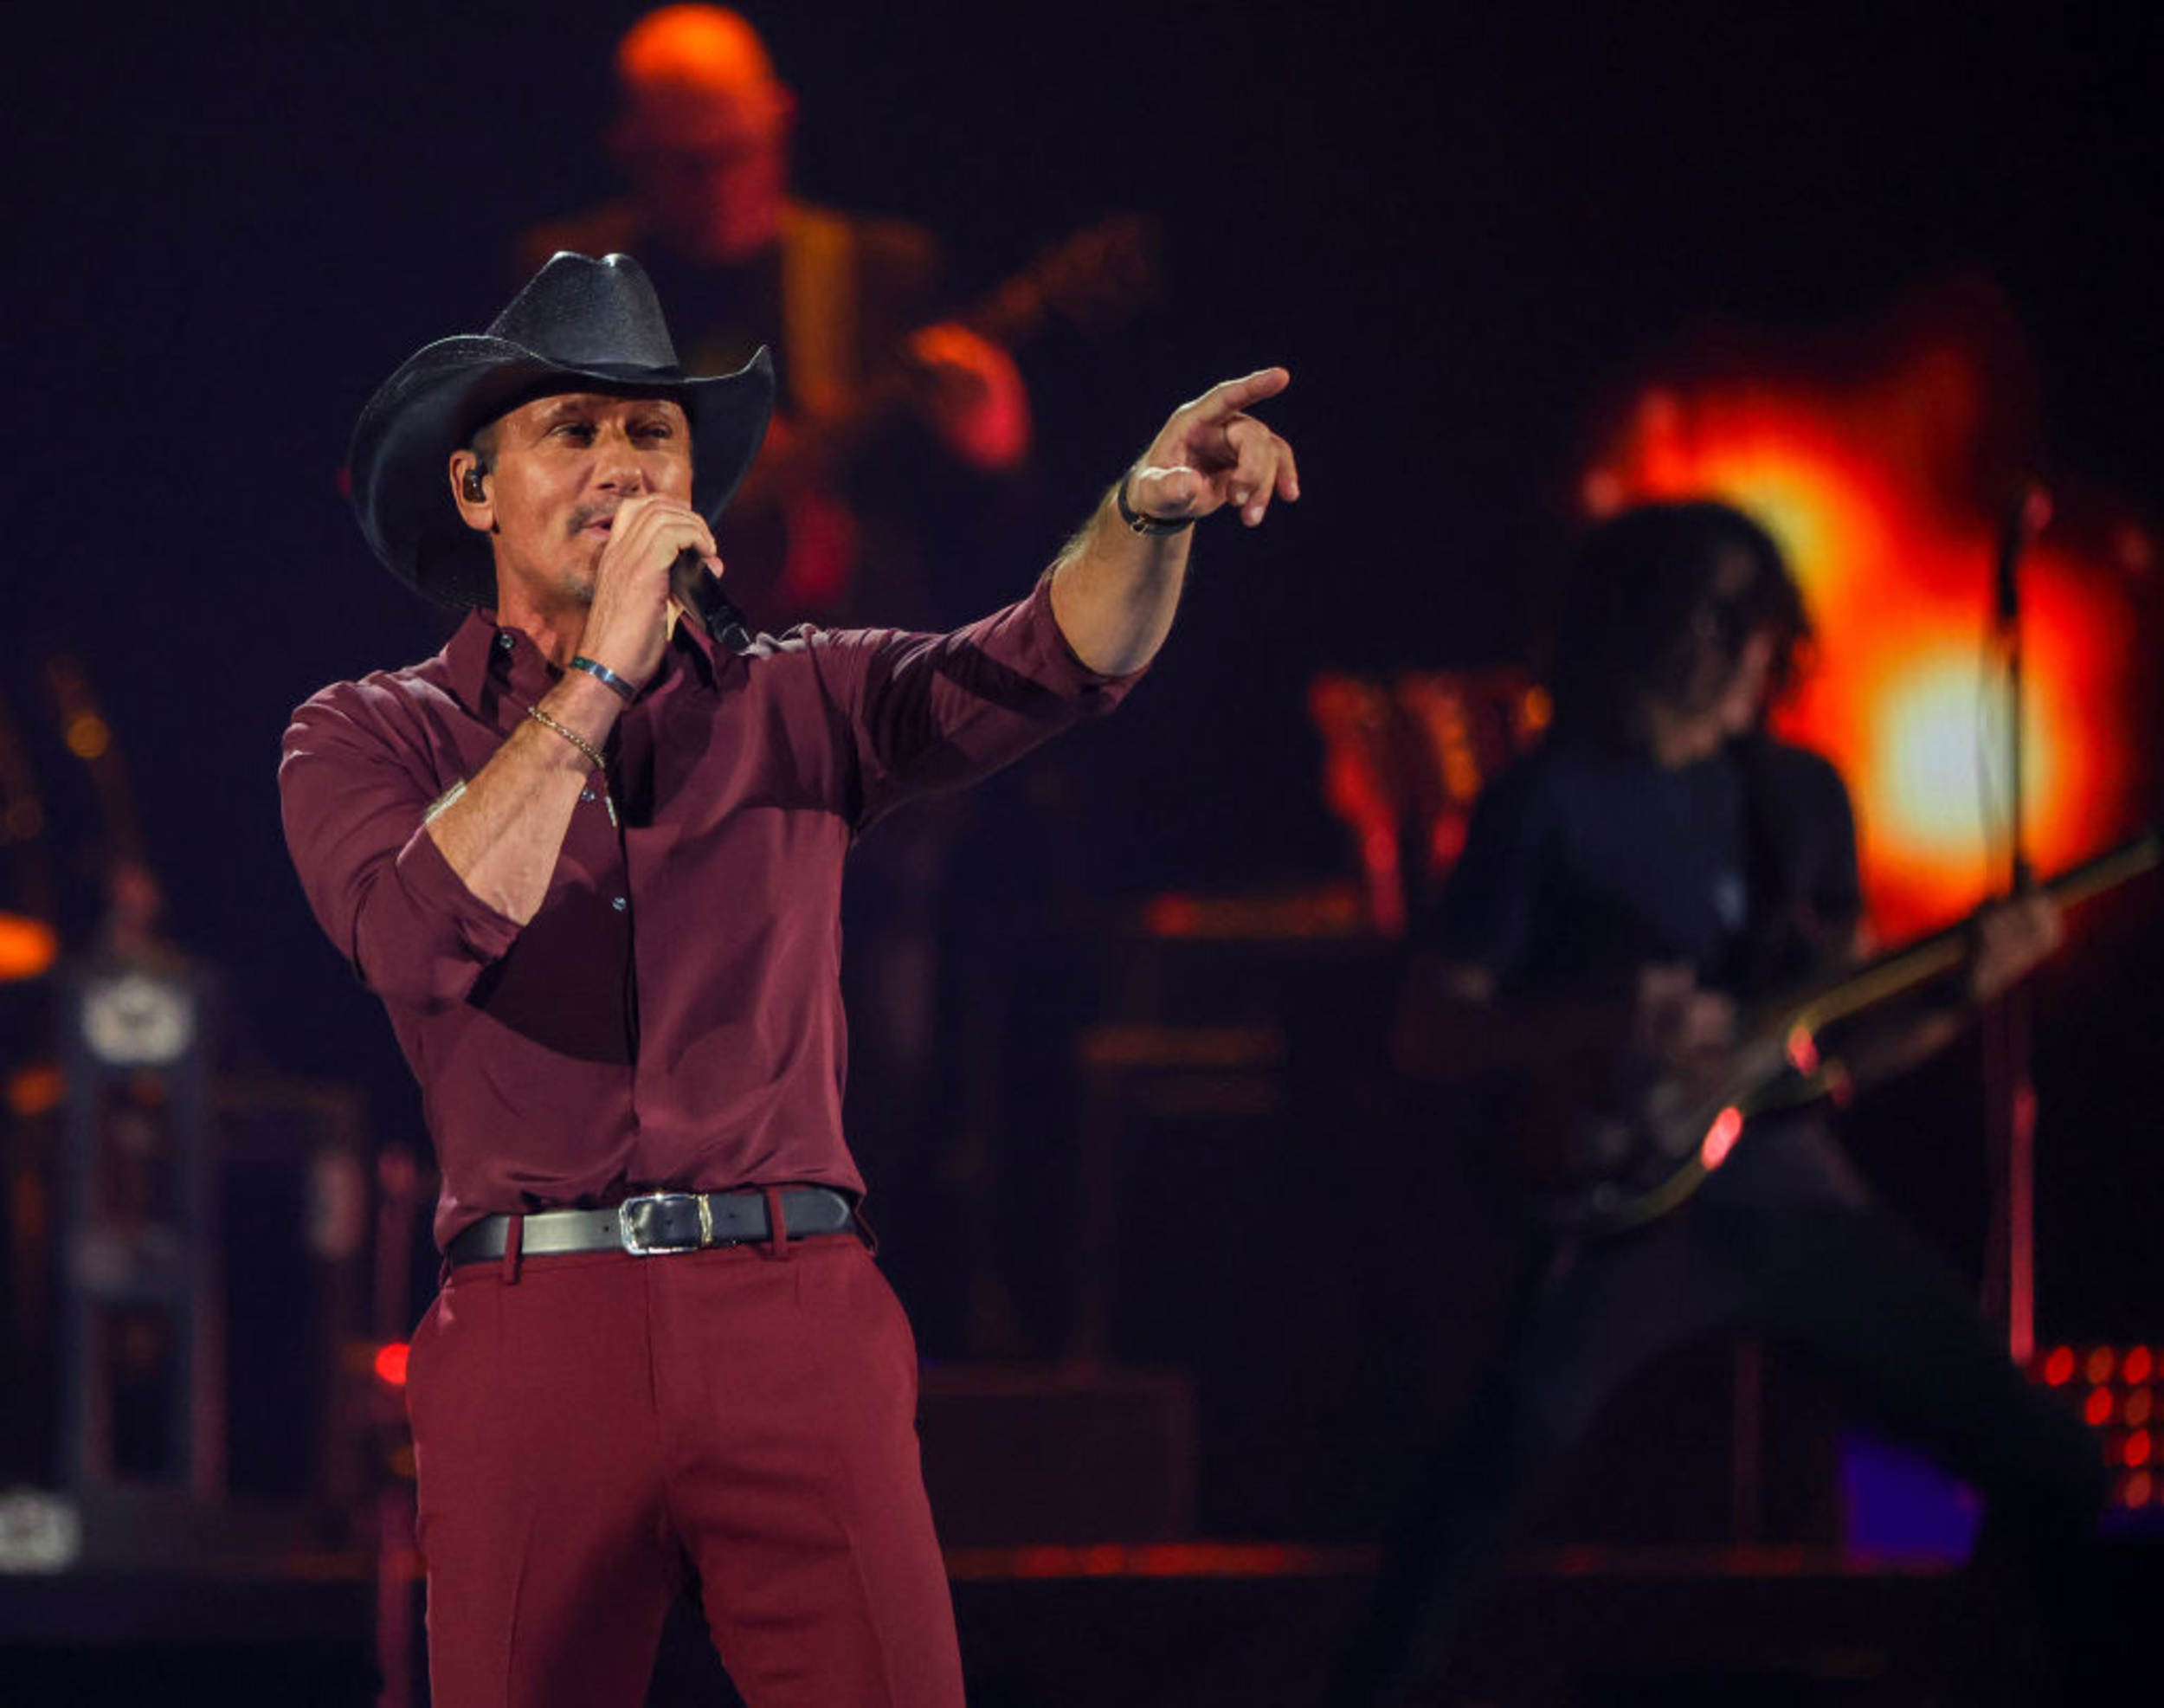 <p>In 2016, Tim McGraw put a tear in the eye of listeners everywhere with "Humble and Kind," a song that reminds us about the important things in life. It was written by Lori McKenna, a prolific singer-songwriter who's penned hits for Little Big Town and countless other artists, who recorded her own version of the song later that year. </p><p>You may also like: <a href='https://www.yardbarker.com/entertainment/articles/the_best_songs_released_by_black_artists_in_the_90s/s1__39082418'>The best songs released by Black artists in the '90s</a></p>